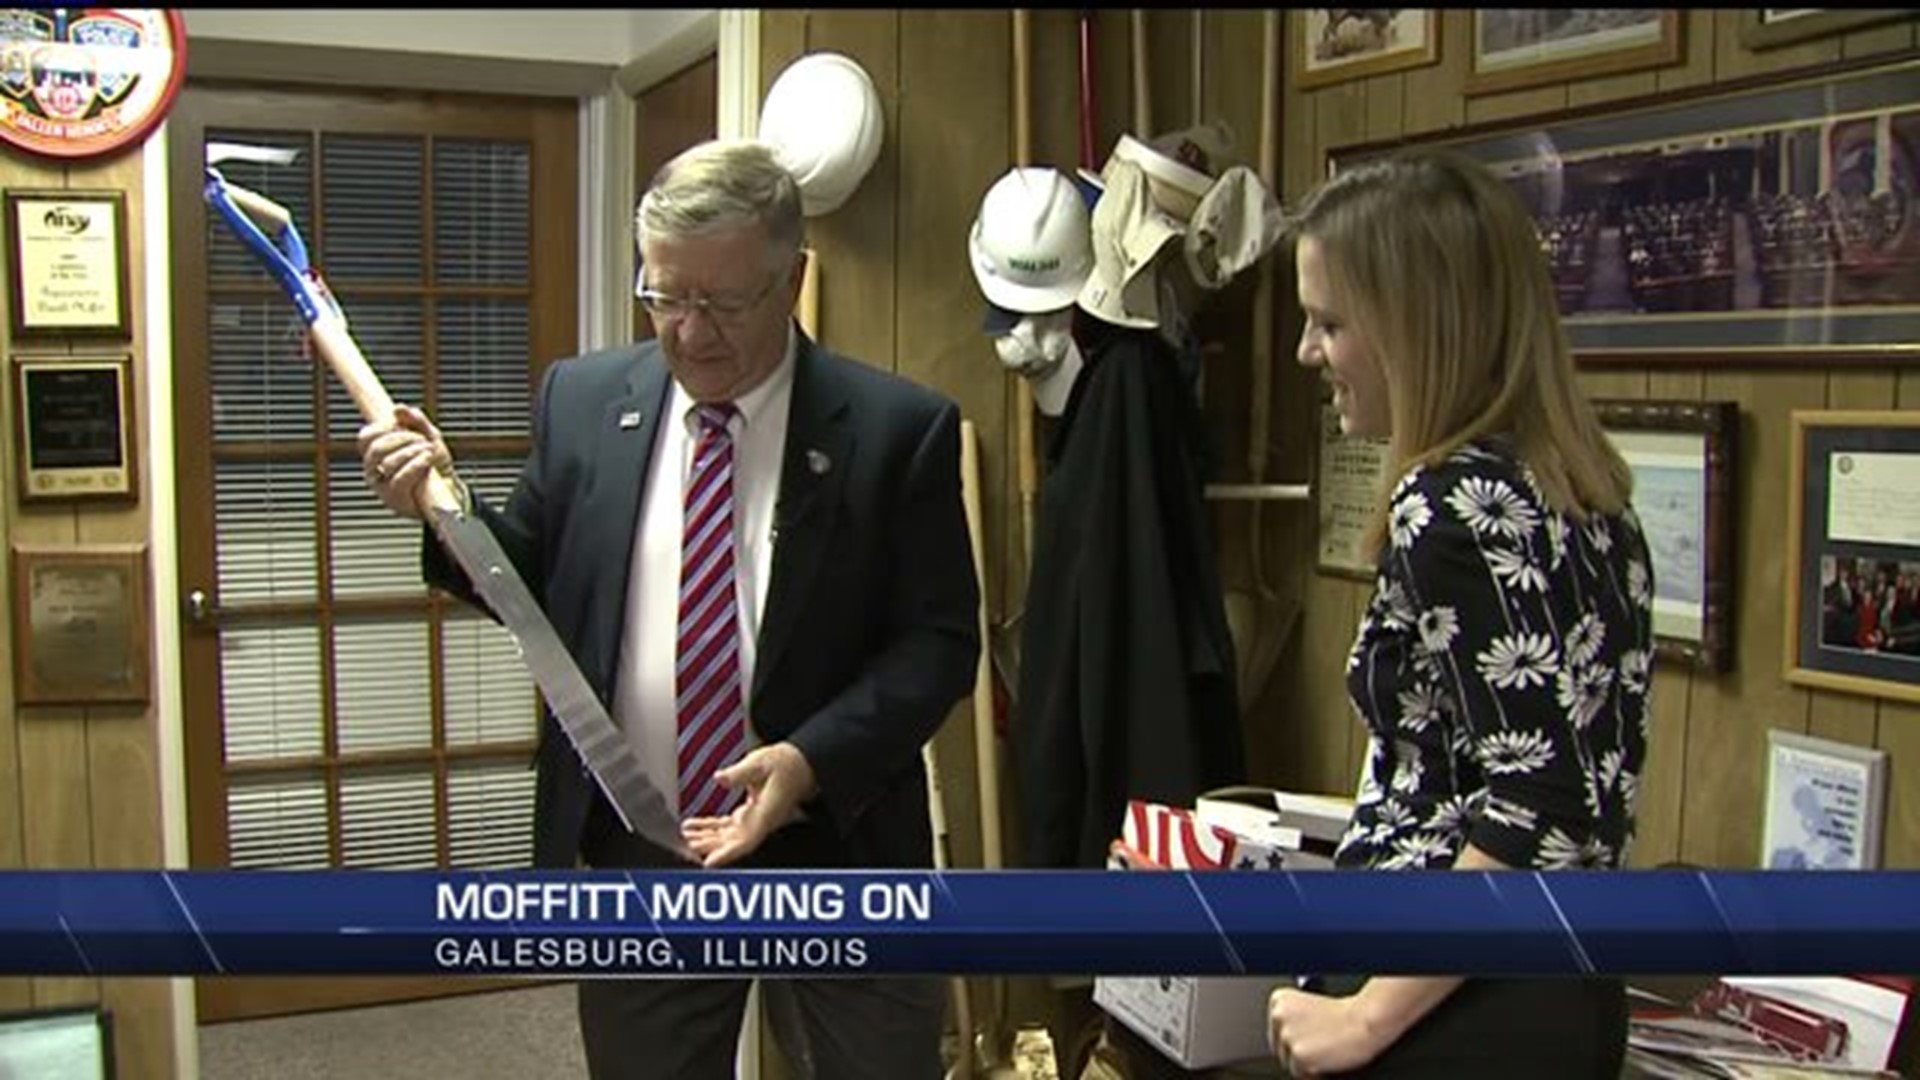 Moffitt reflects on 24 years in the Illinois House of Representatives